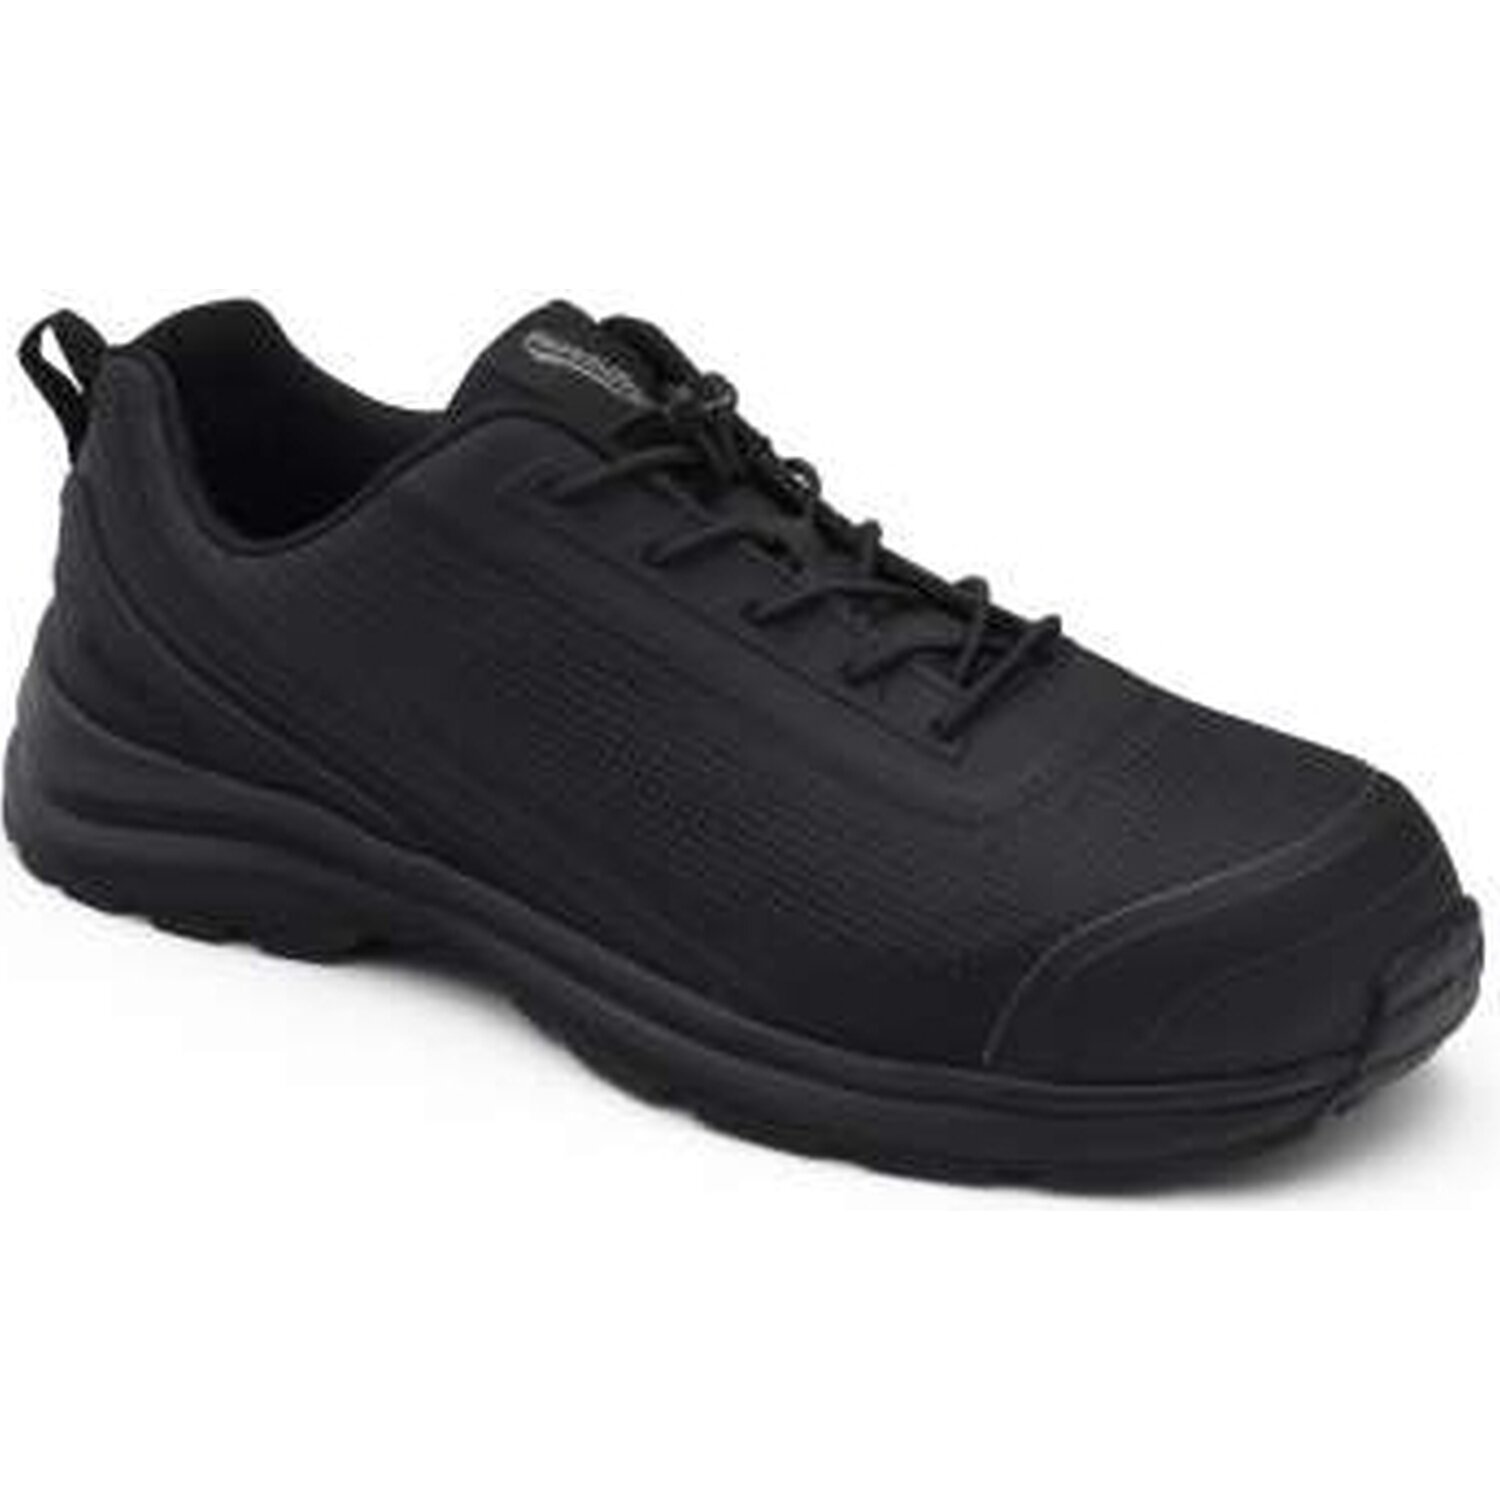 Blundstone 795 Jogger Safety Shoe With Scuff Protection